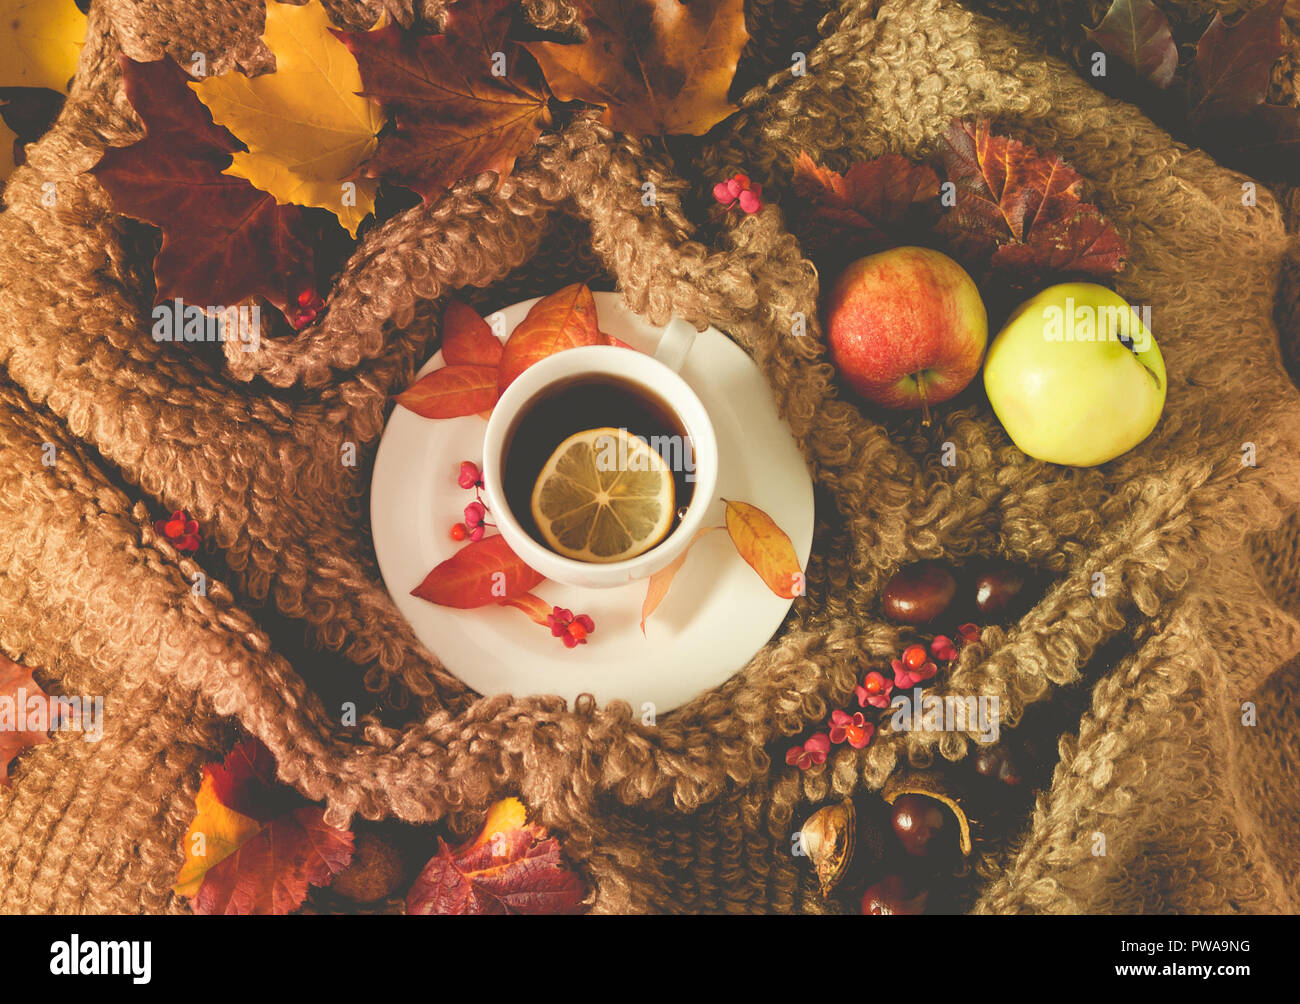 white cup with hot tea, steam, woolen material surrounds a saucer, colorful maple leaves on a cloth, two apples and chestnuts, an autumn look, Stock Photo